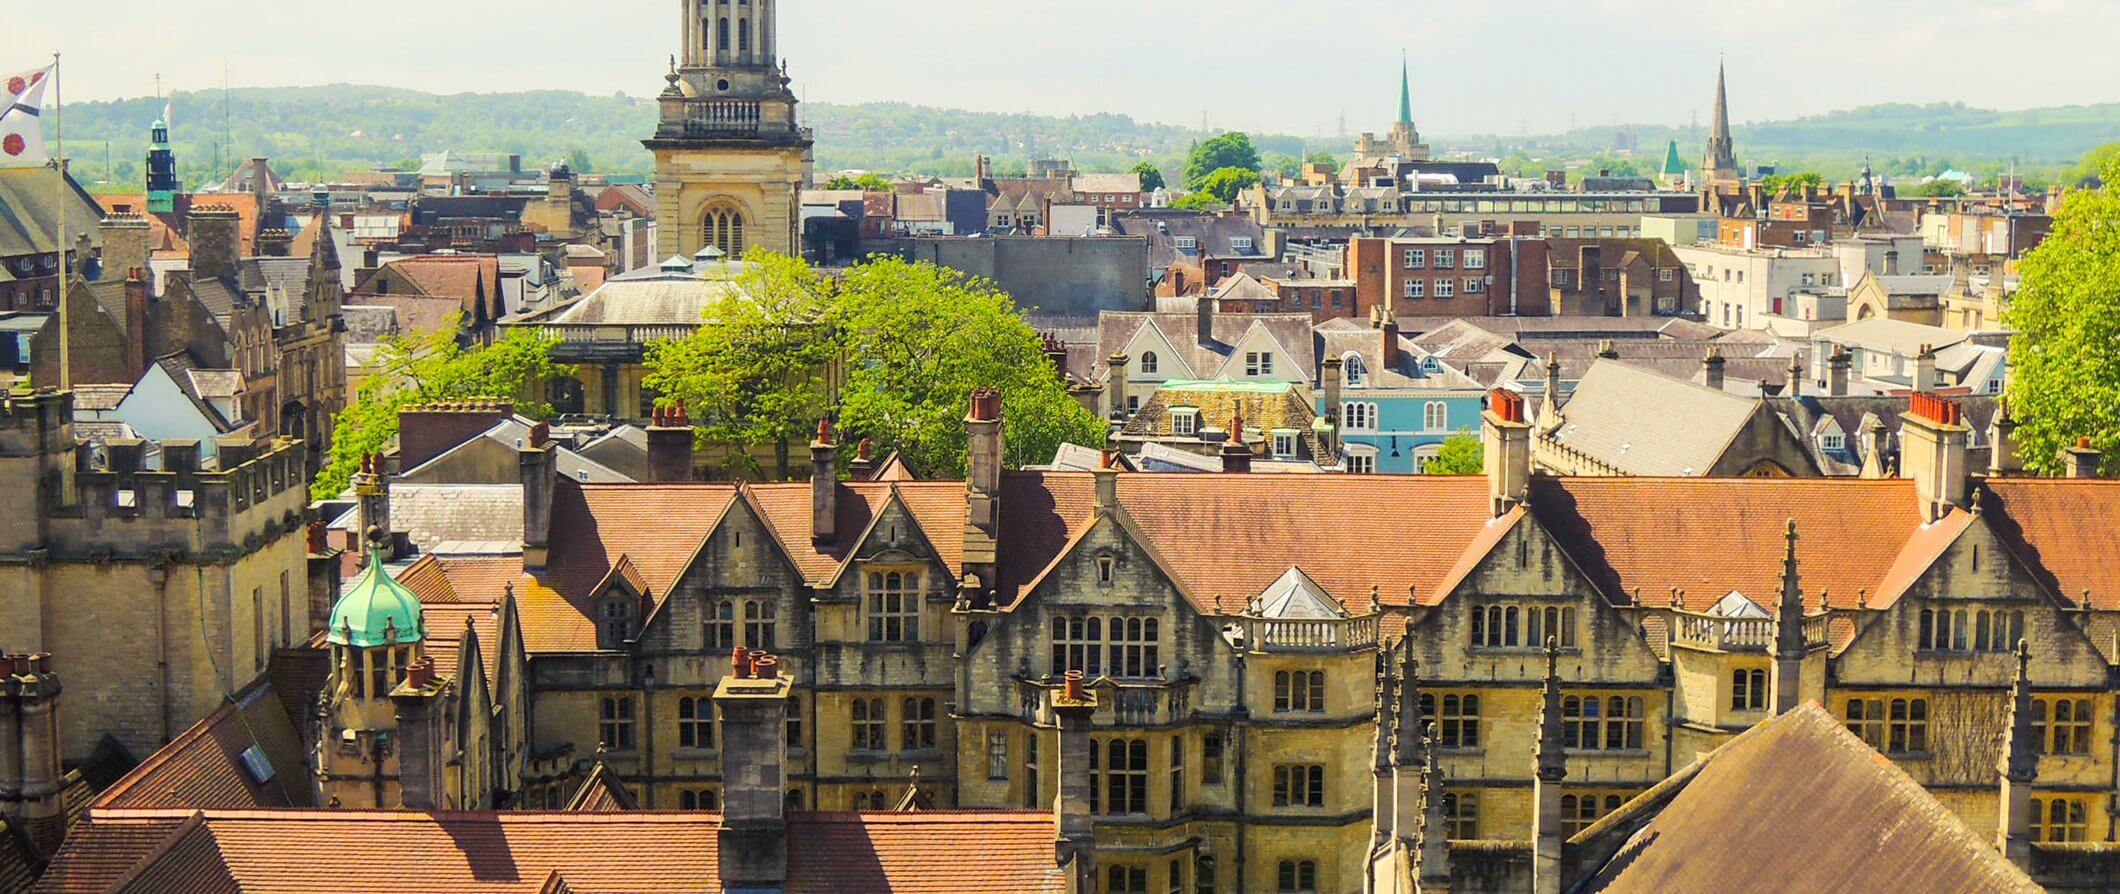 view of the city of Oxford in the United Kingdom